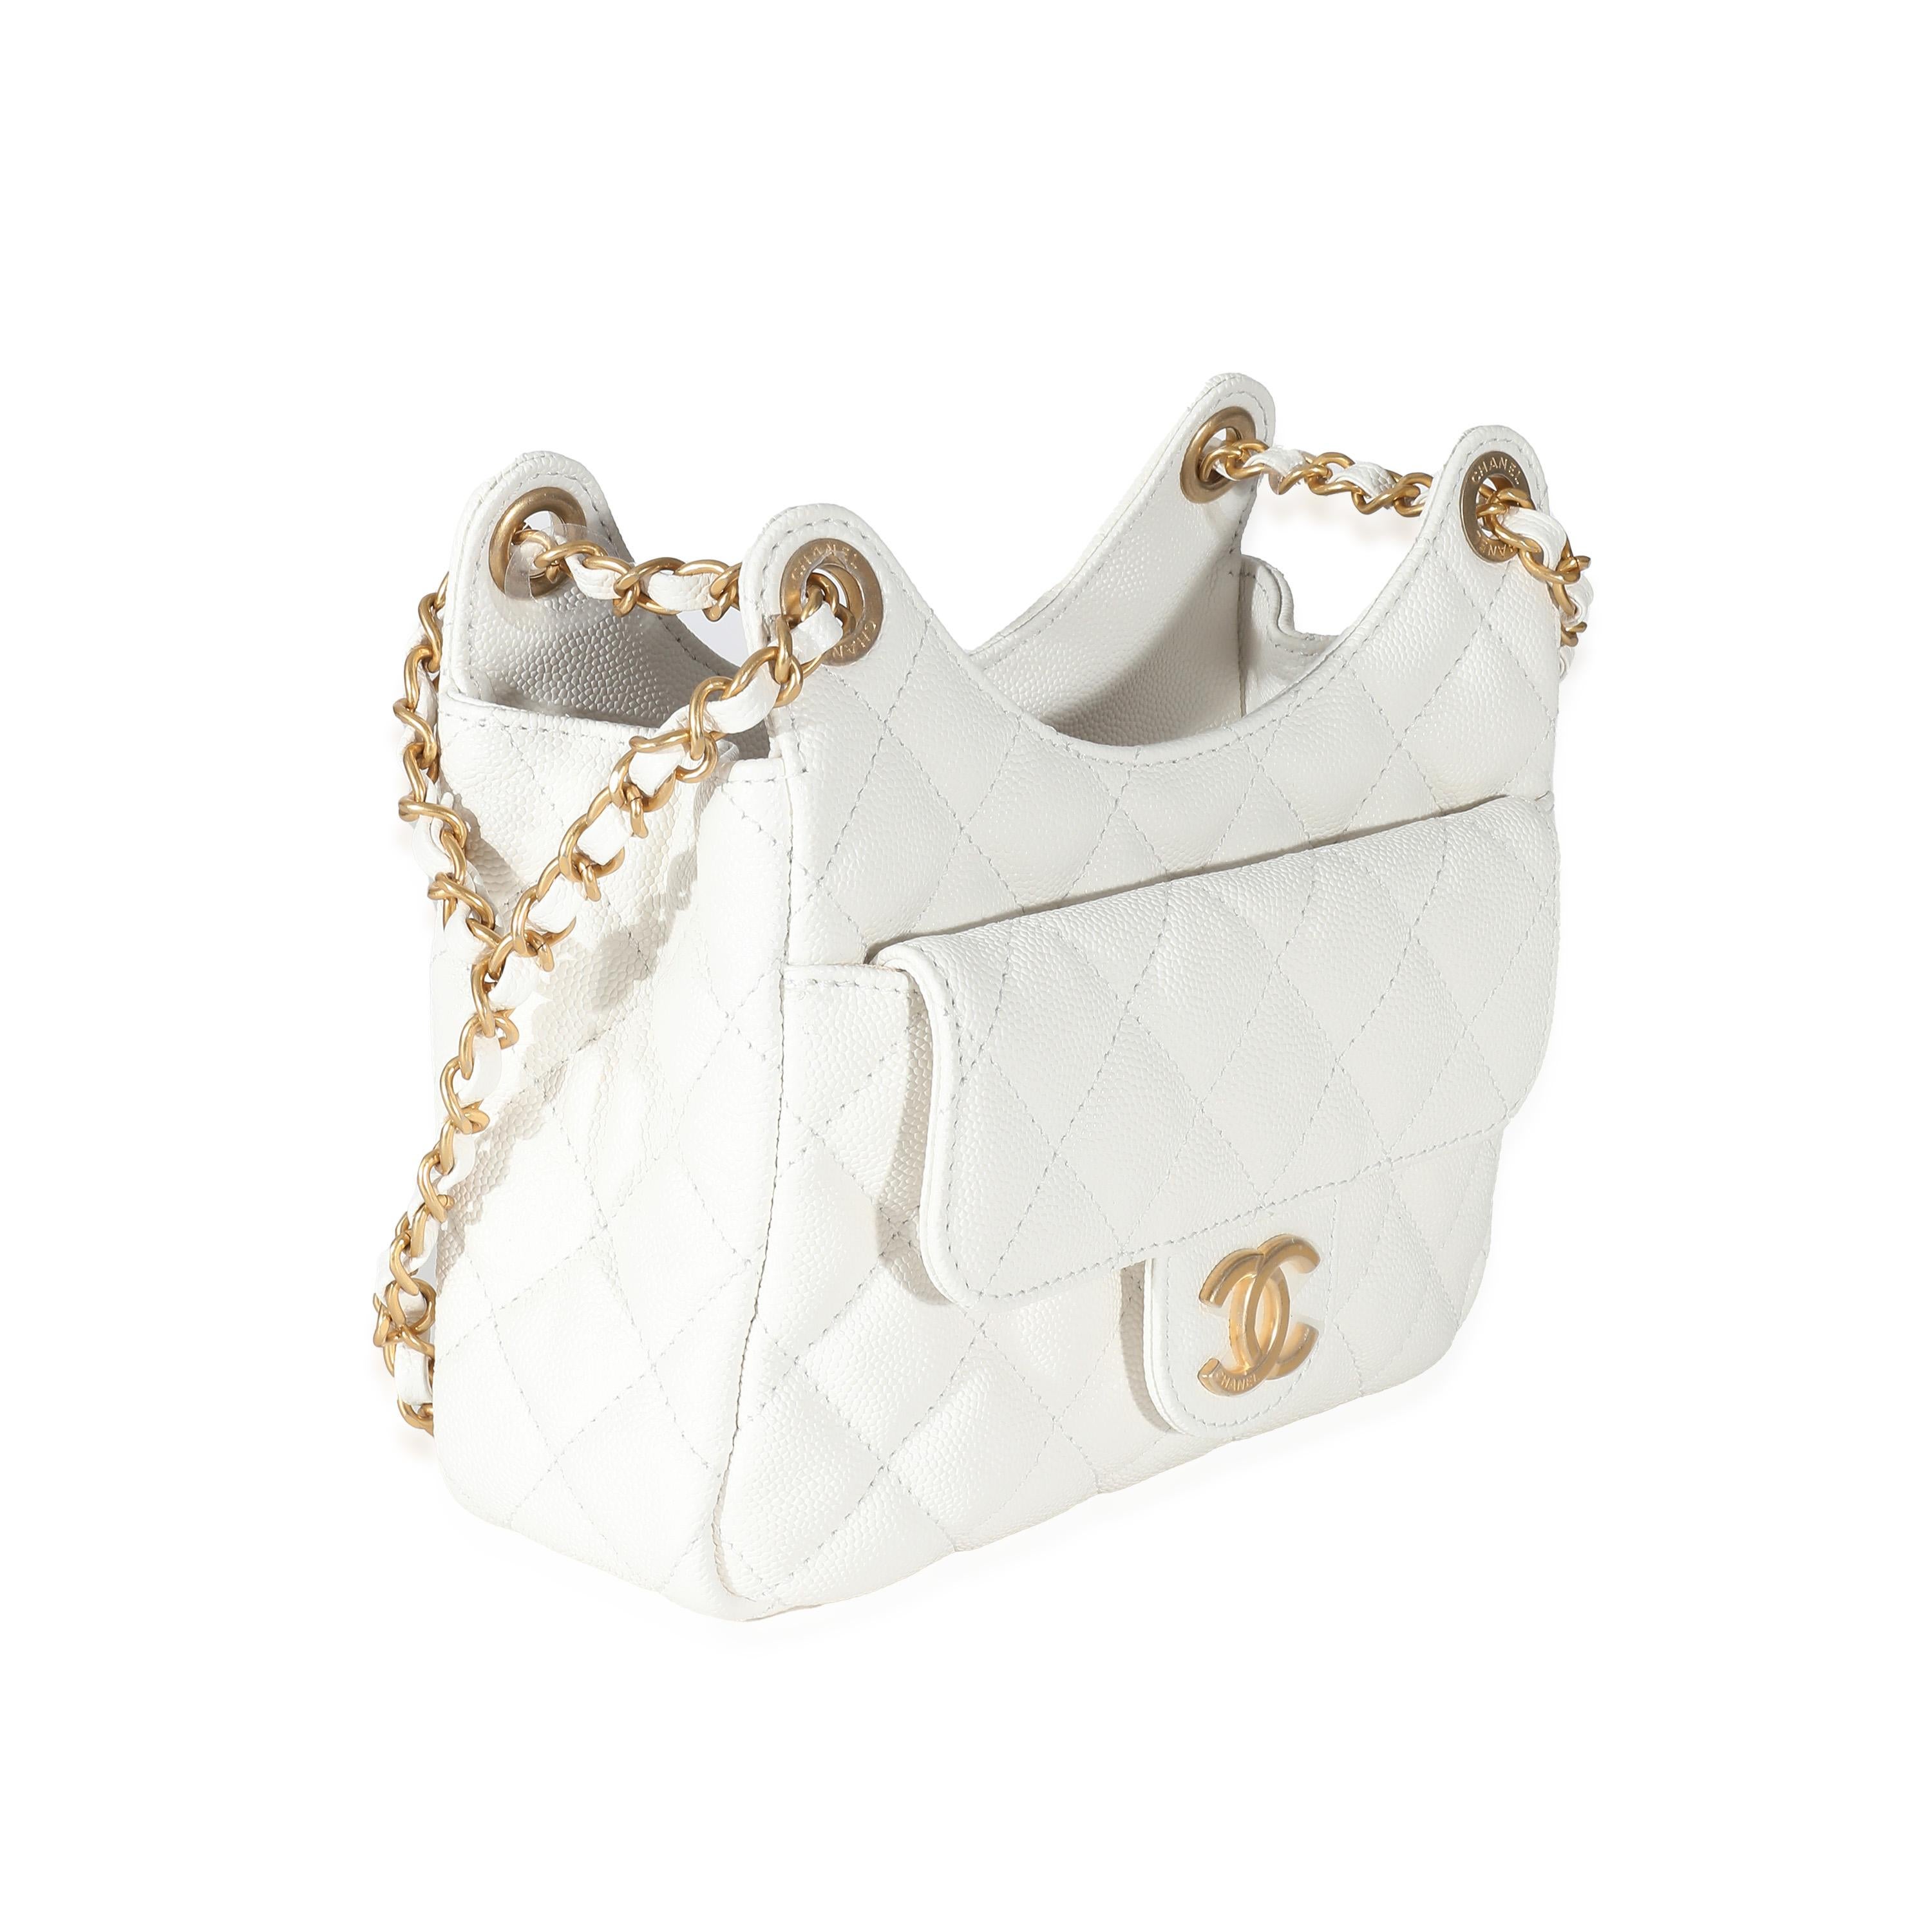 Listing Title: Chanel White Quilted Caviar Small Wavy CC Hobo
SKU: 136860
Condition: Pre-owned 
Handbag Condition: Pristine
Condition Comments: Item has no indication of wear.
Brand: Louis Vuitton
Model: Small Wavy CC Hobo
Origin Country: